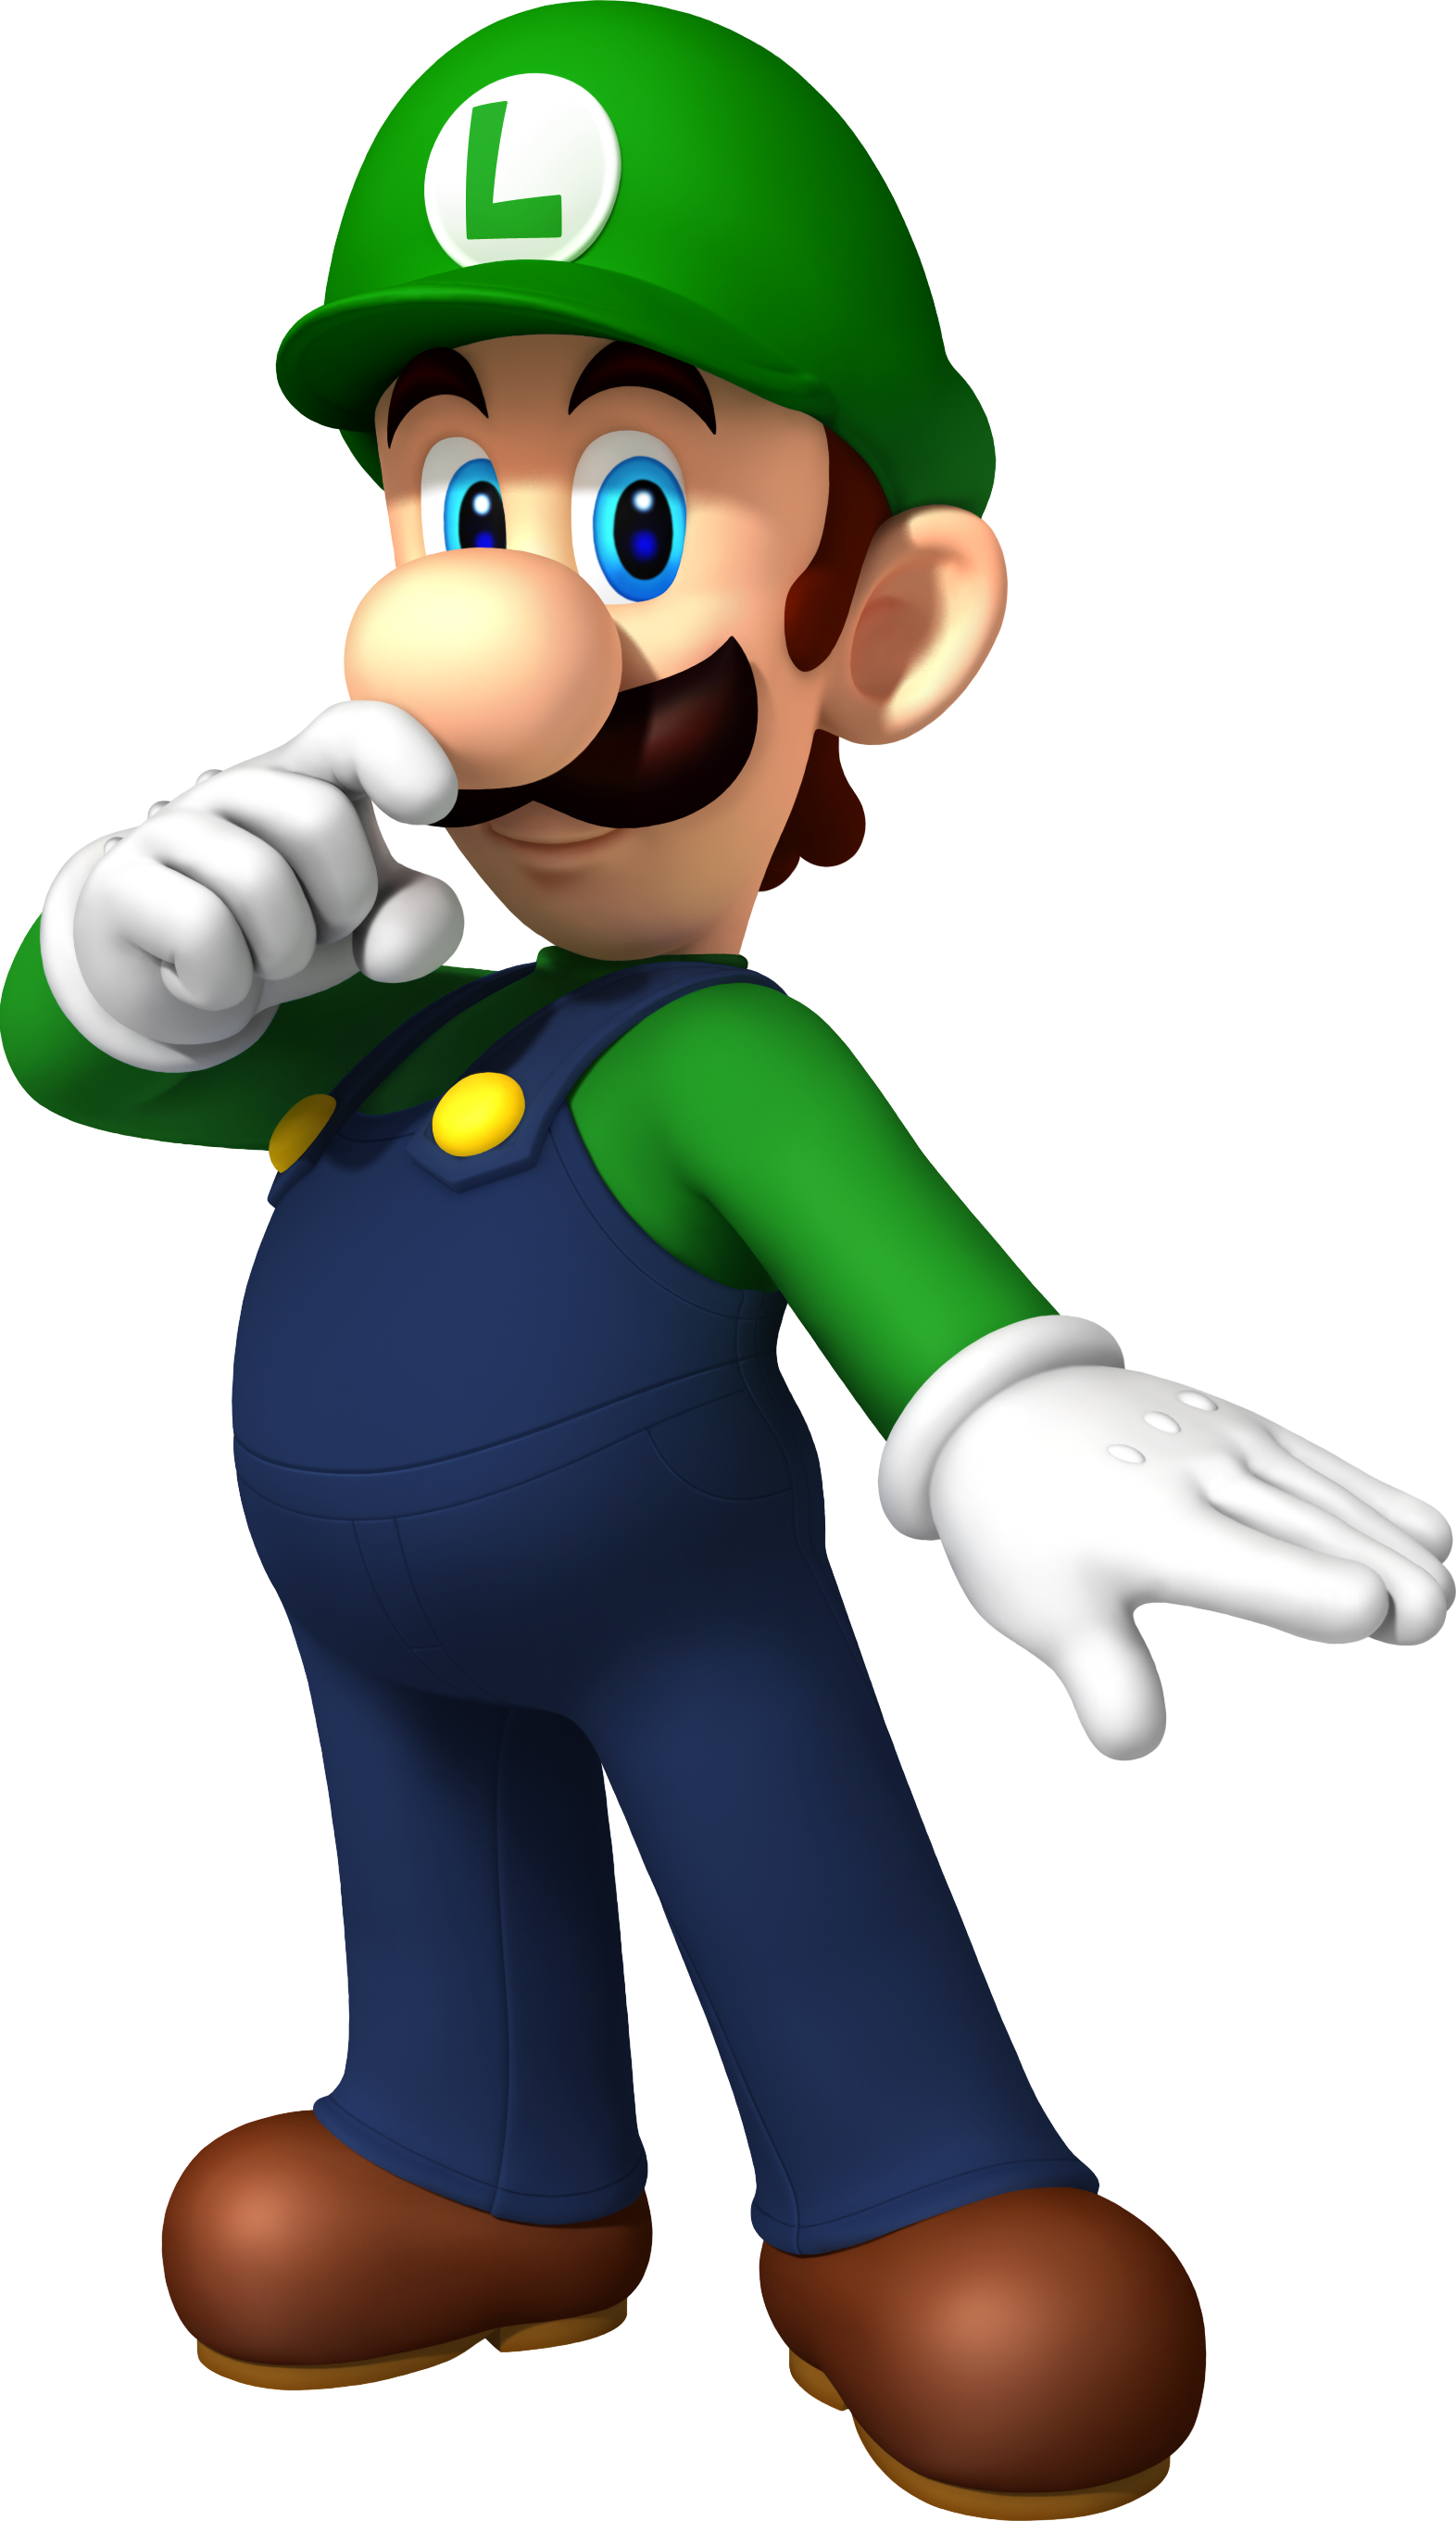 0 Result Images of Super Mario Bros Movie Luigi Png - PNG Image Collection